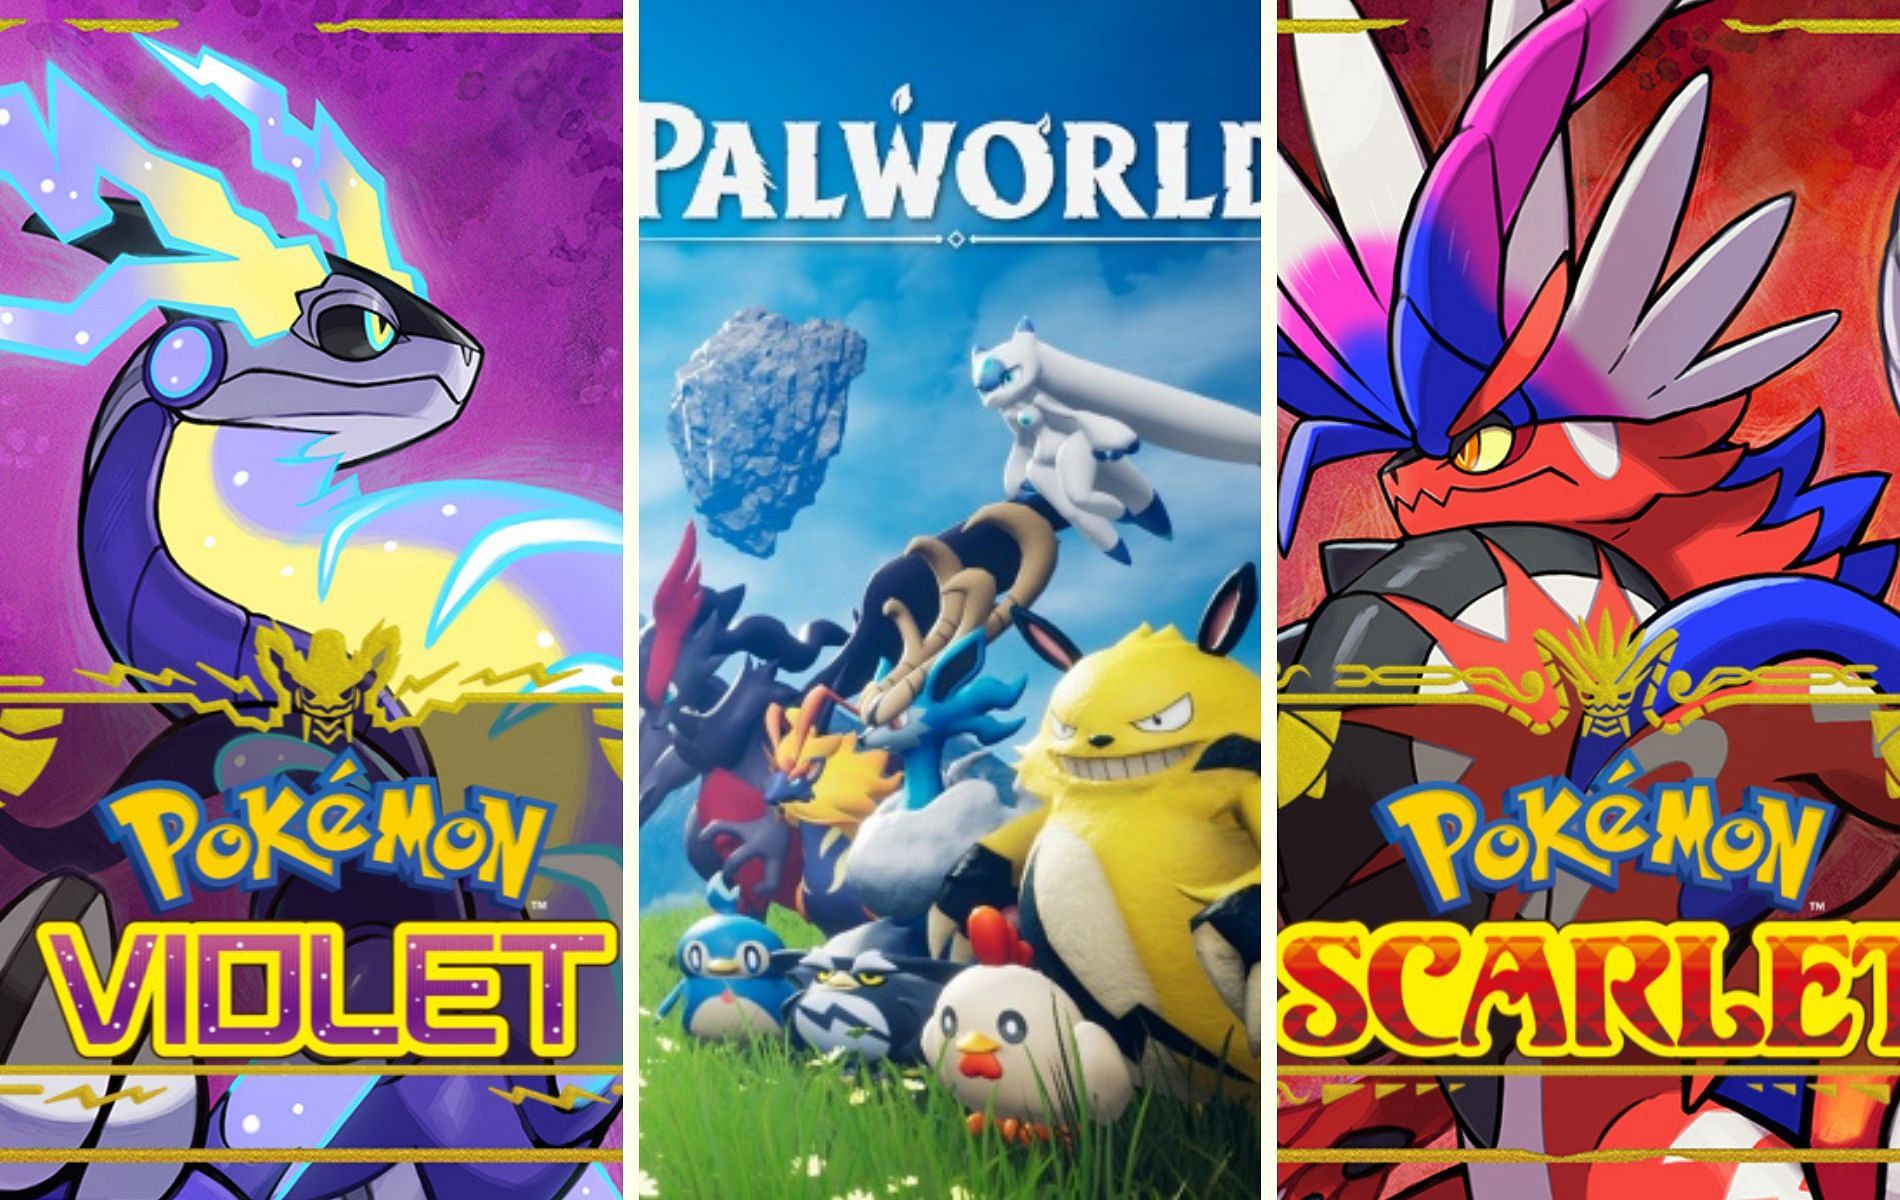 Palworld outshines Pokemon Scarlet and Violet in many ways.